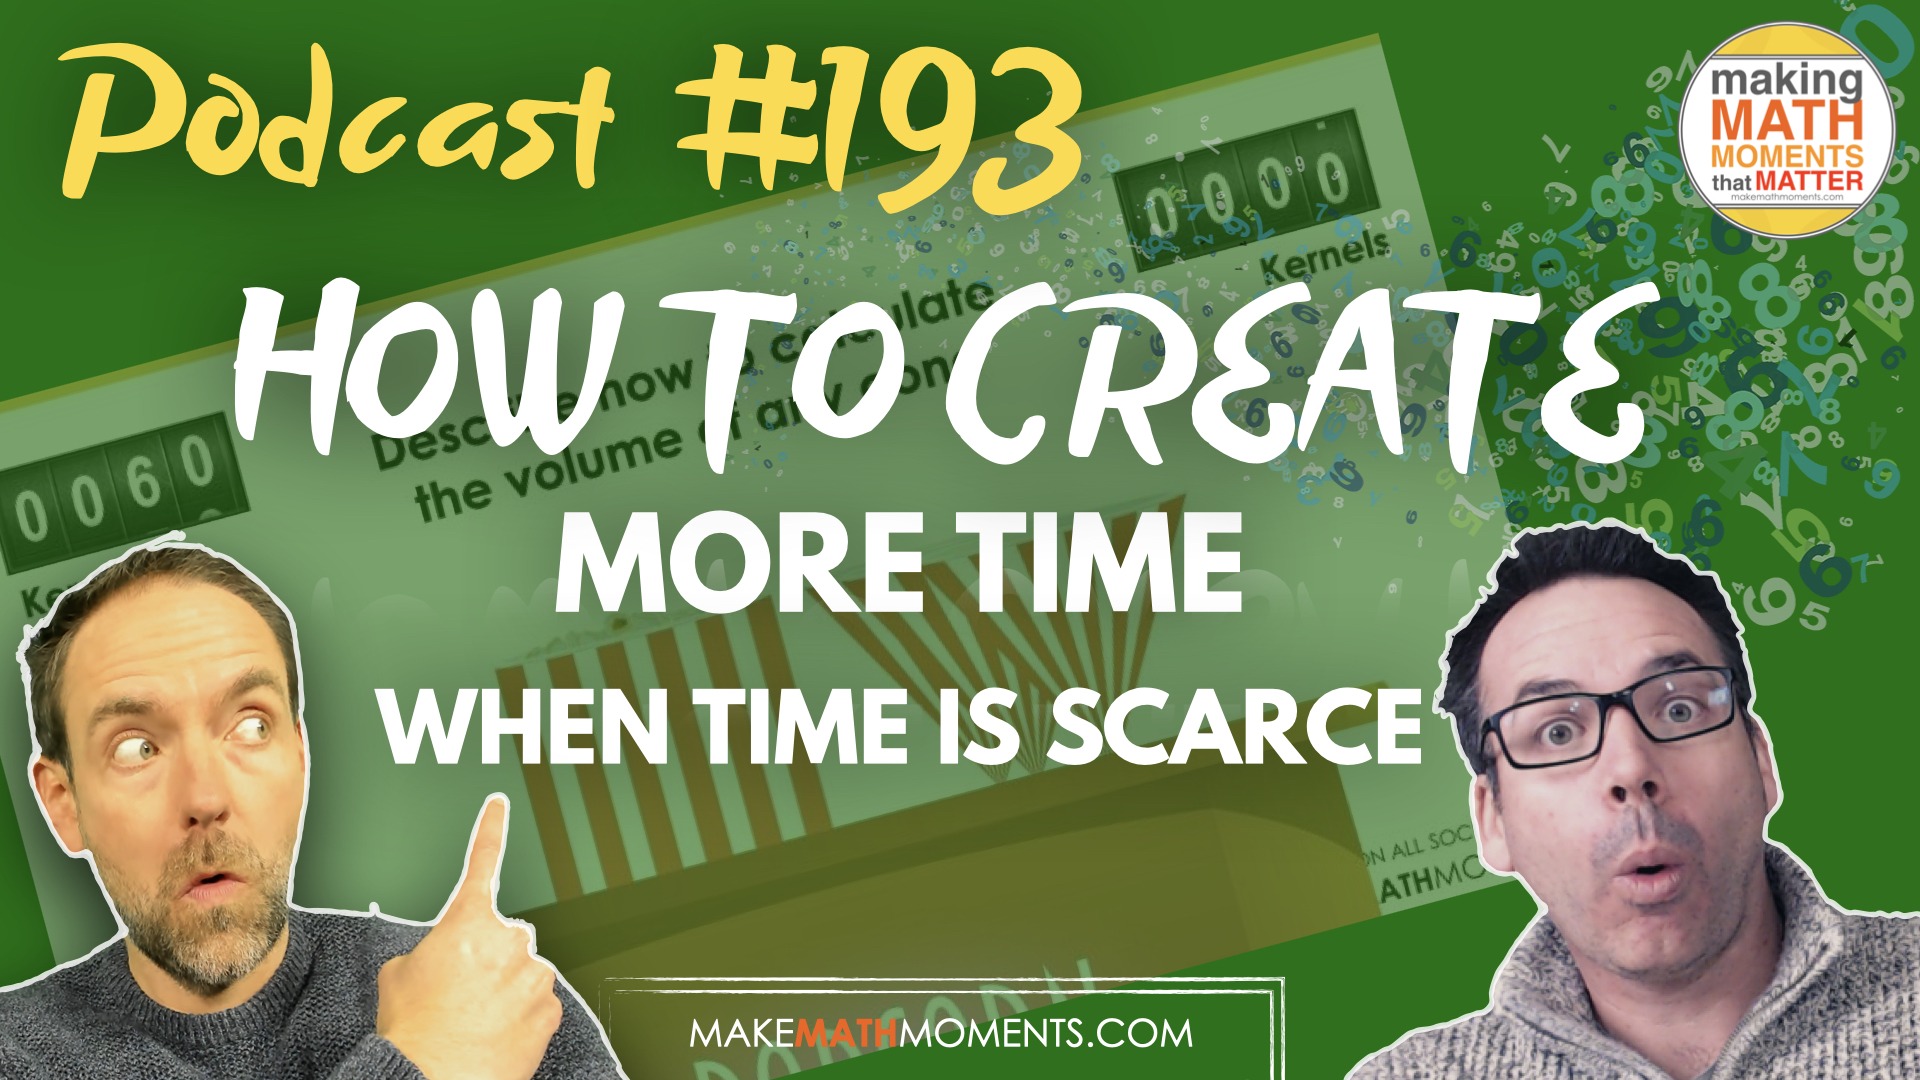 Episode 193 – How To Create More Time When Time is Scarce